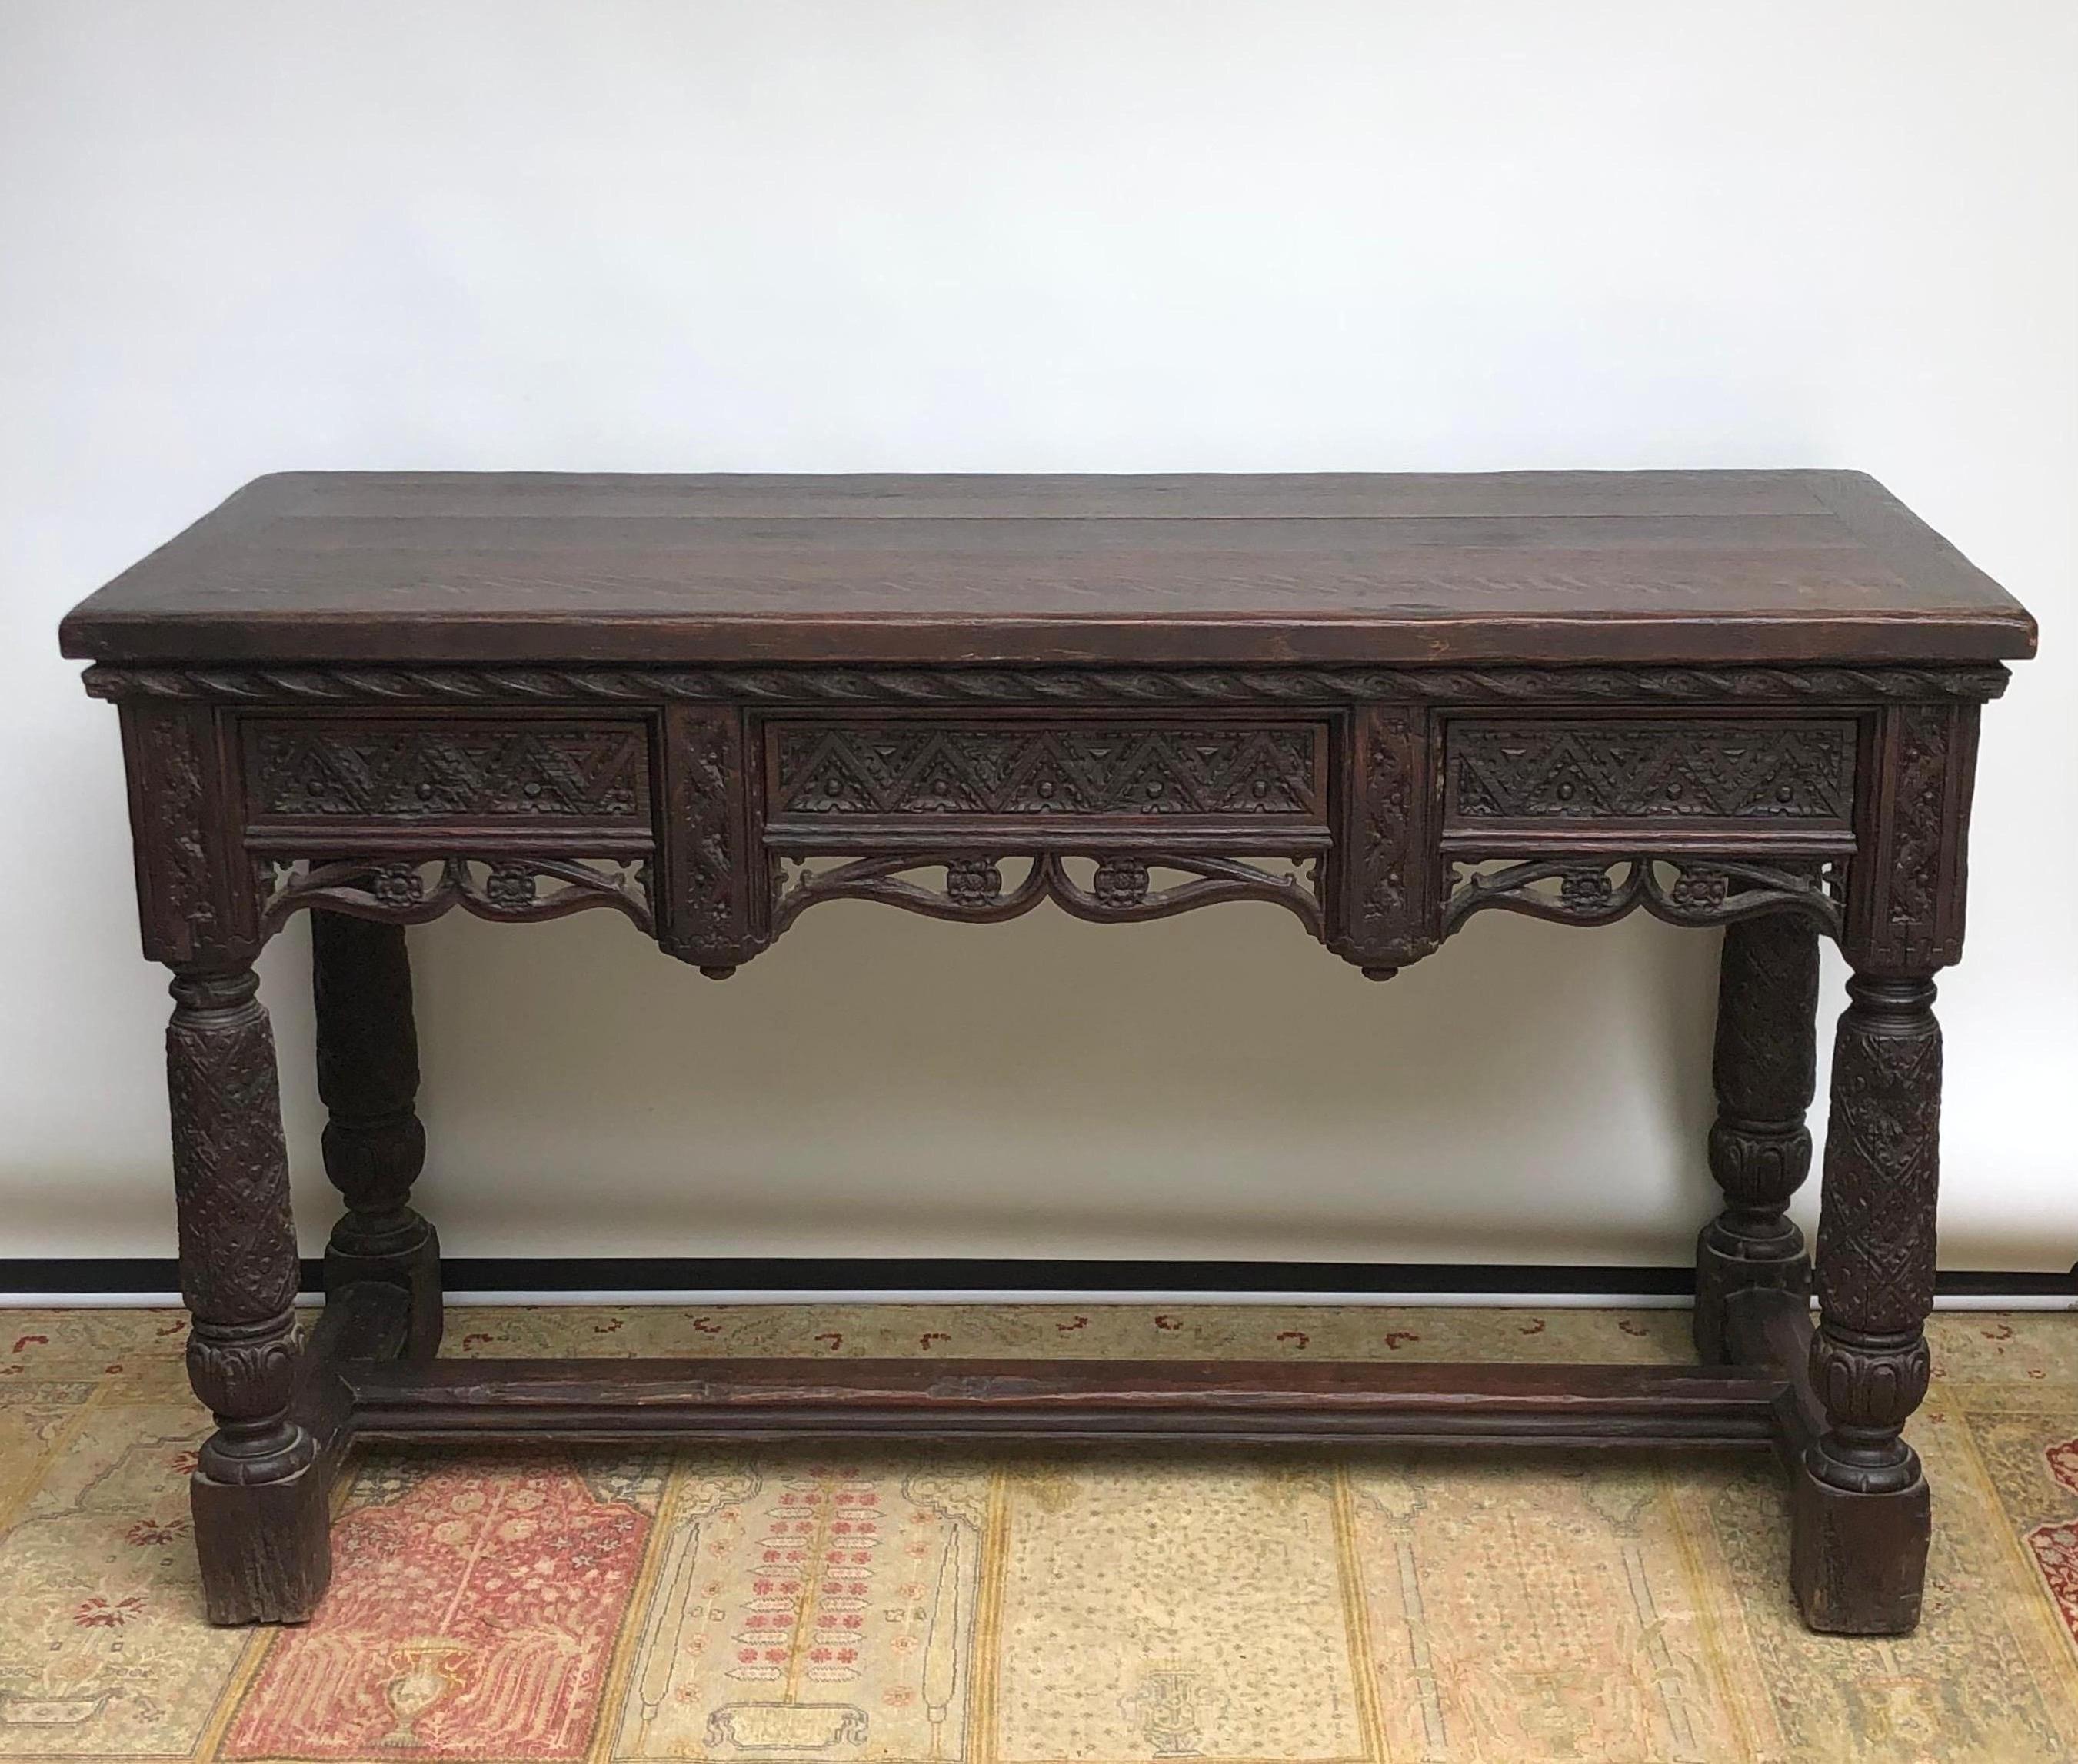 A elegant Elizabethan Style Oak hand carved Console Hall Table in the Gothic taste, made in England during the Renaissance Revival Period. The Renaissance Revival Sideboard is wonderfully proportioned and is handmade with solid English oak. The